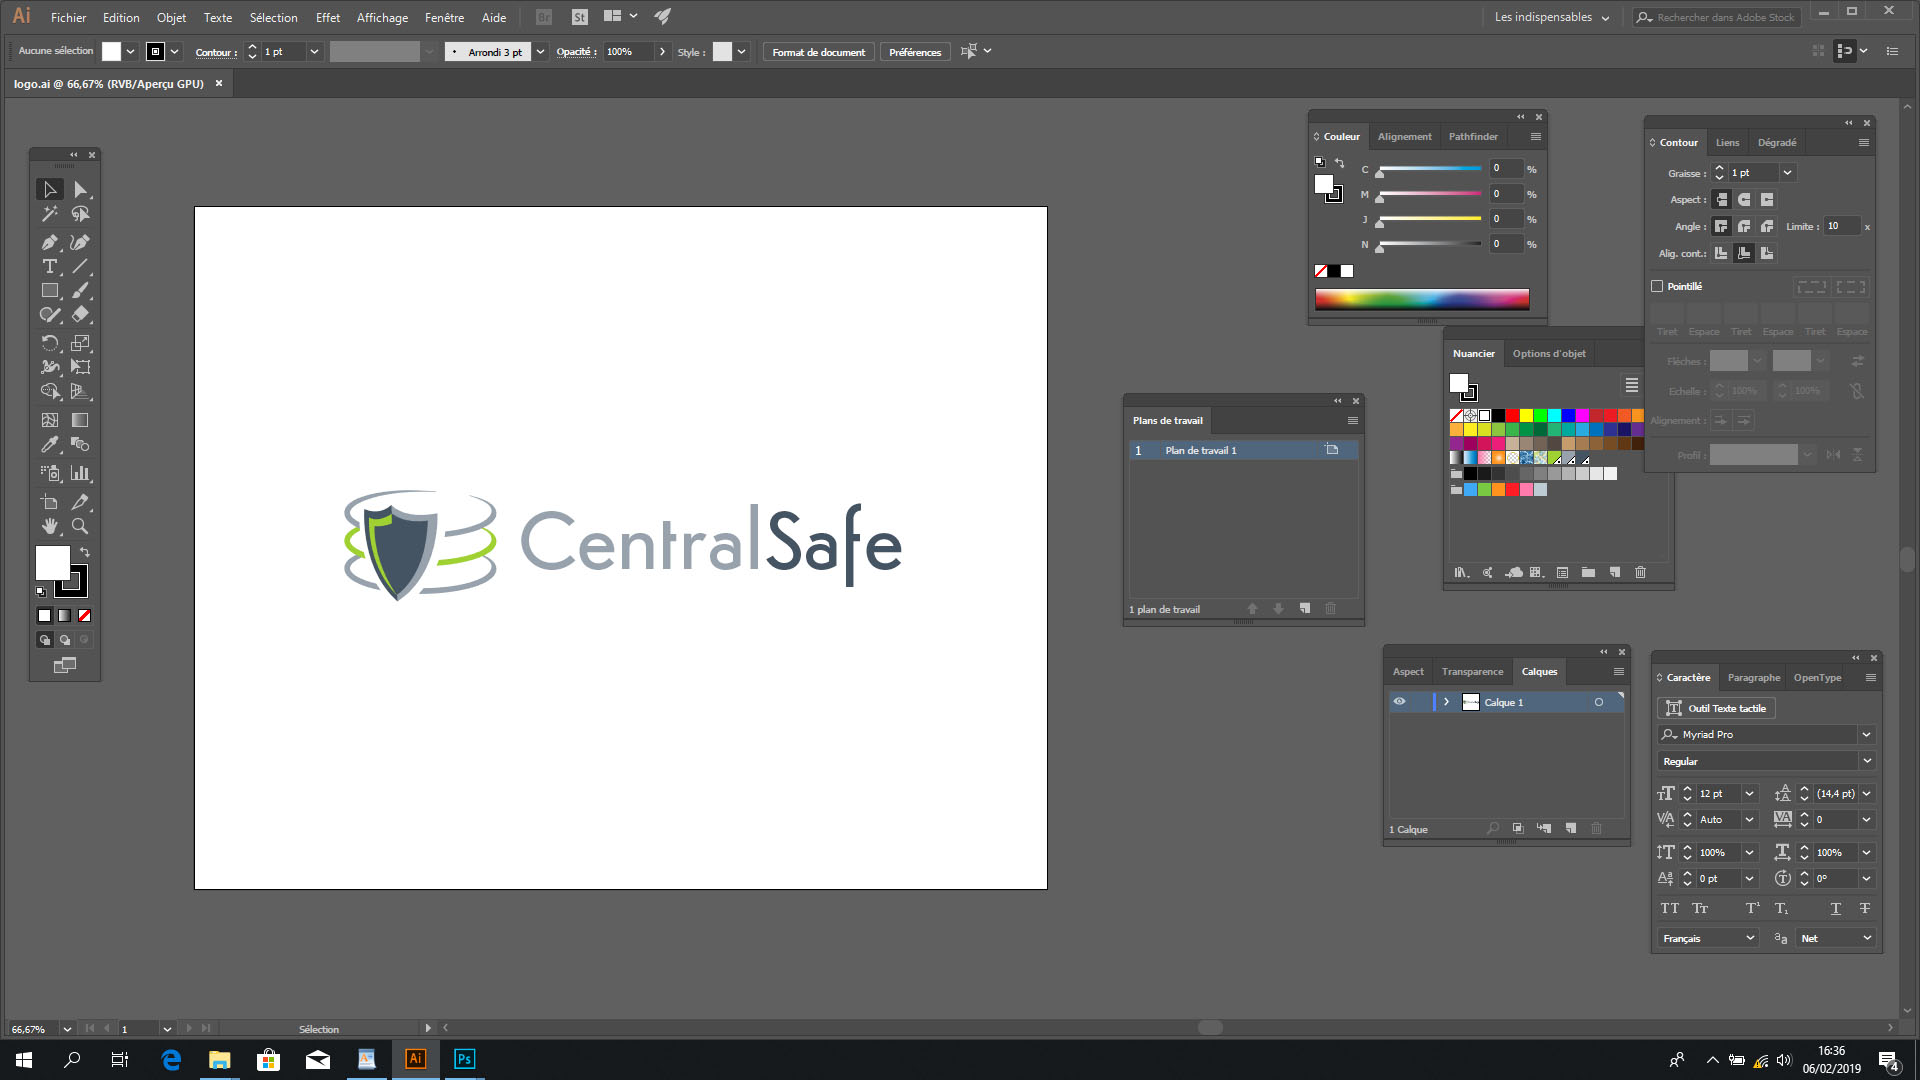 Here, you have to open the logo in Adobe Illustrator